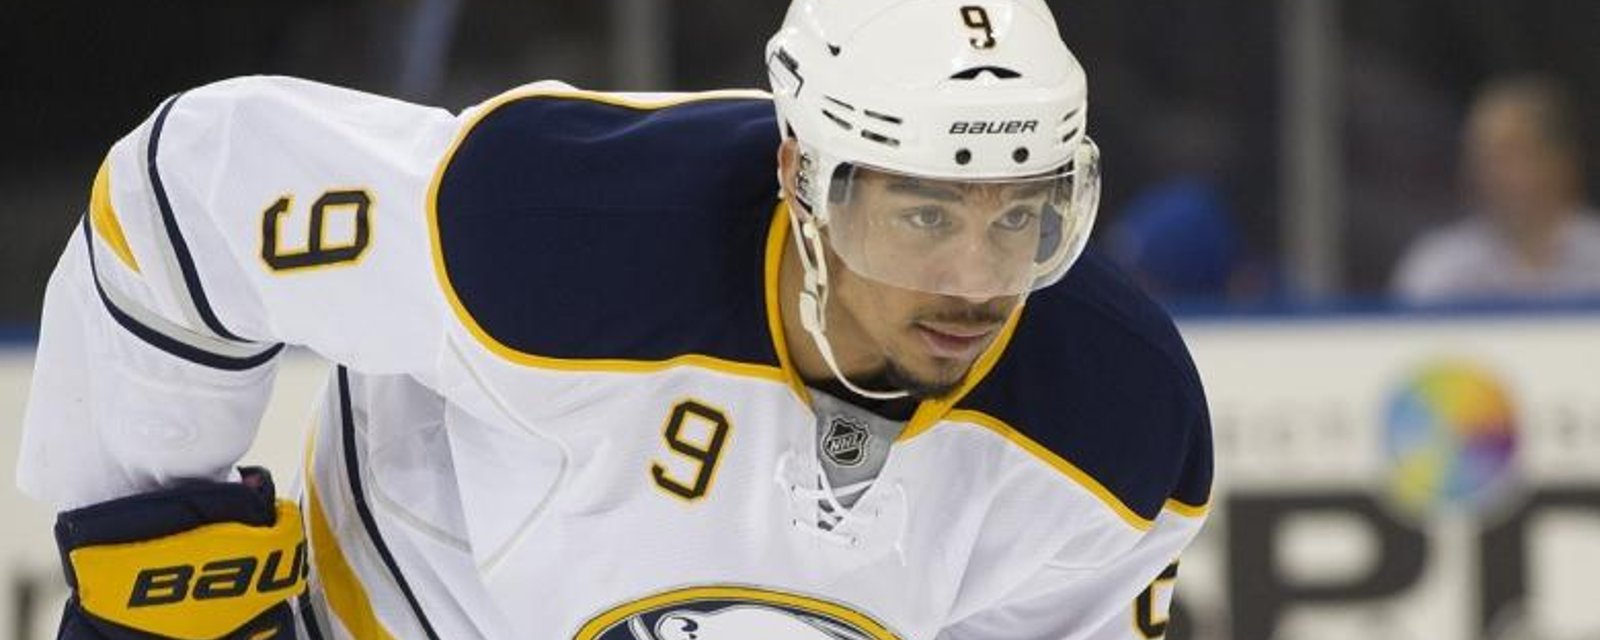 Report: Witness in Evander Kane case speaks out in damning testimony against the NHL star.